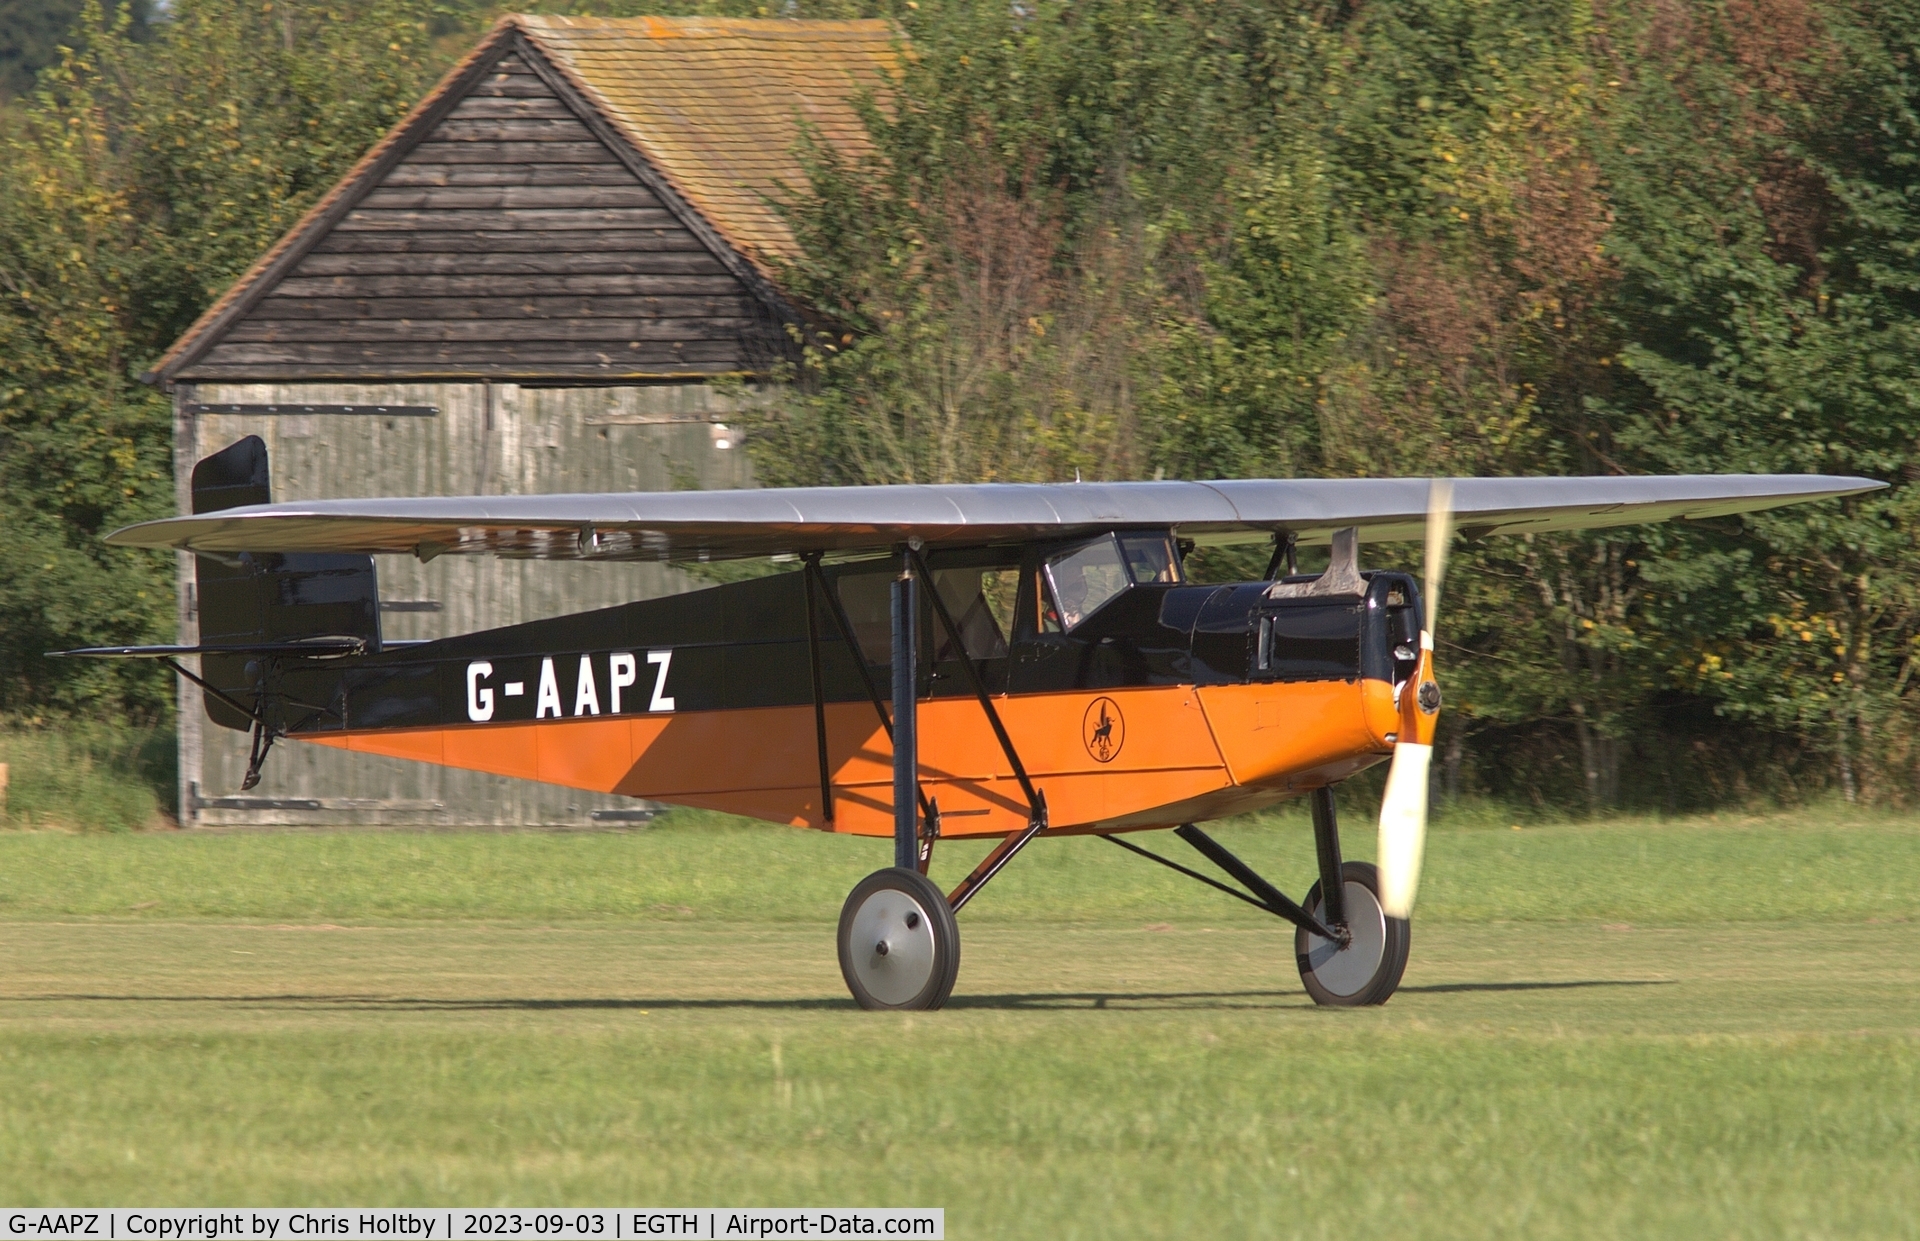 G-AAPZ, 1930 Desoutter MKI C/N D.25, Just about to lift off for the Vintage Airshow at Old Warden 2023